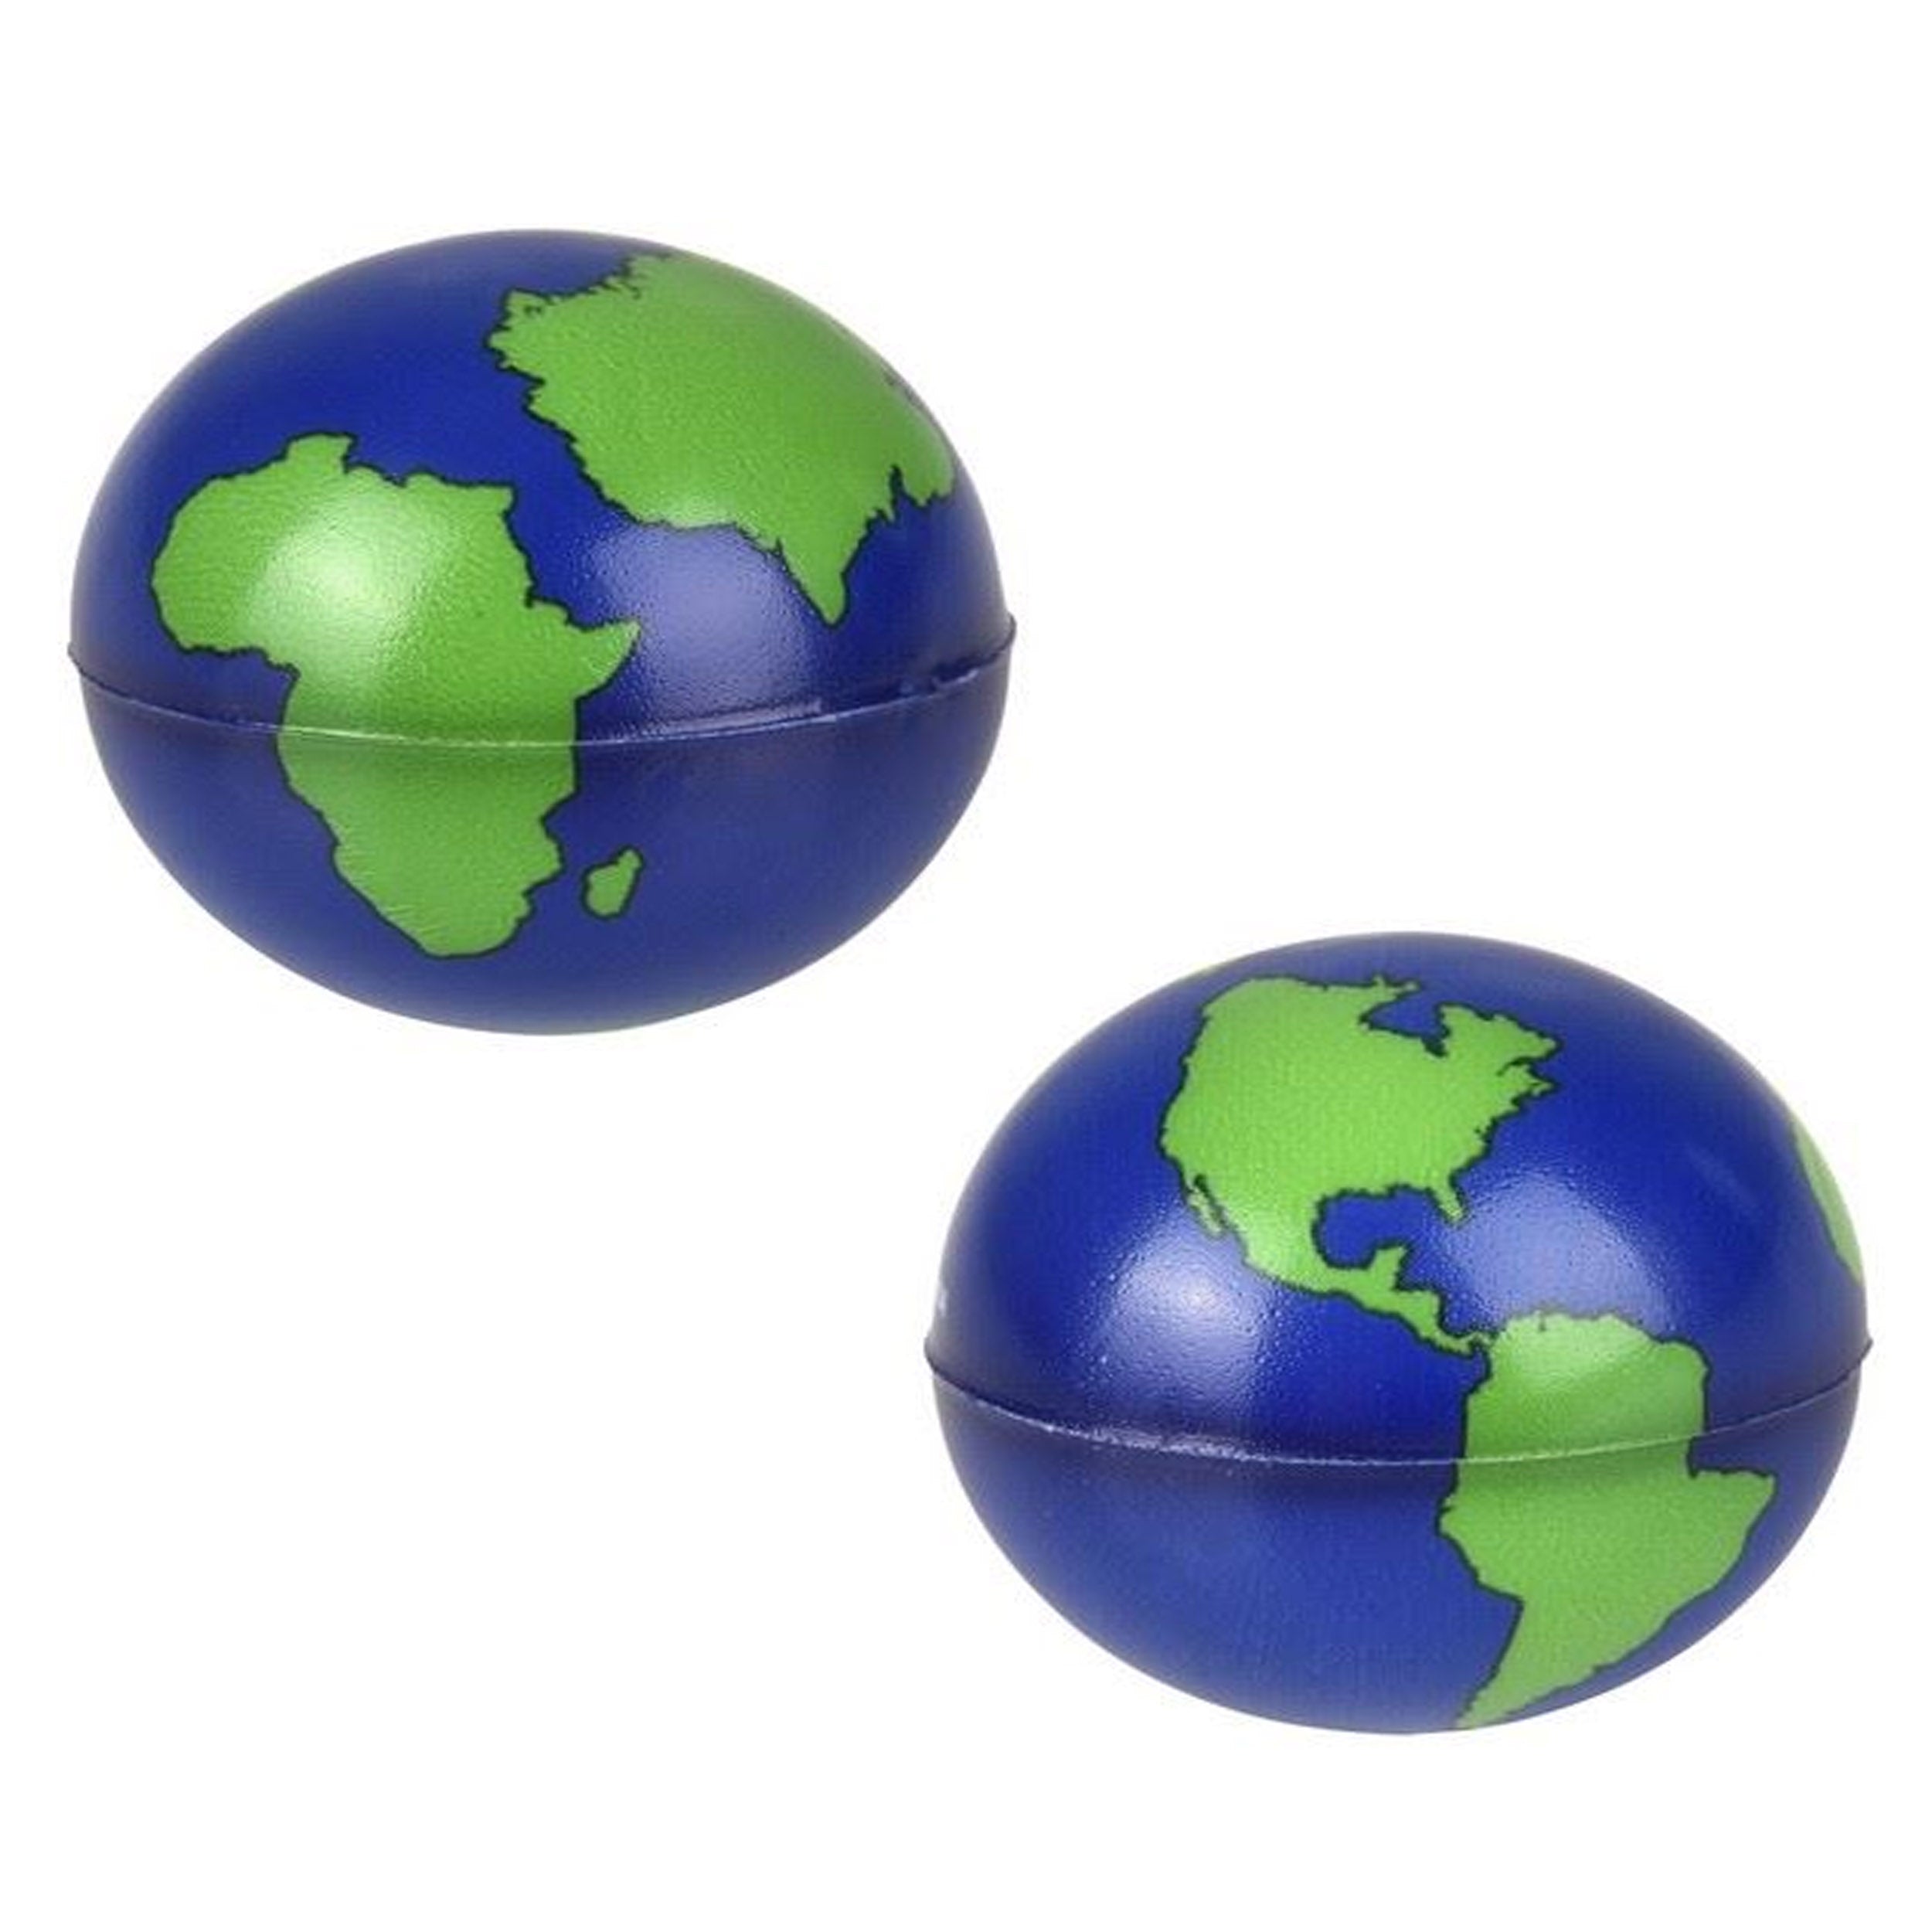 Wholesale Bouncy Earth Squeeze Ball: Spongy Stress Relief Toy with a Fun Twist Assorted Colors (MOQ-12)